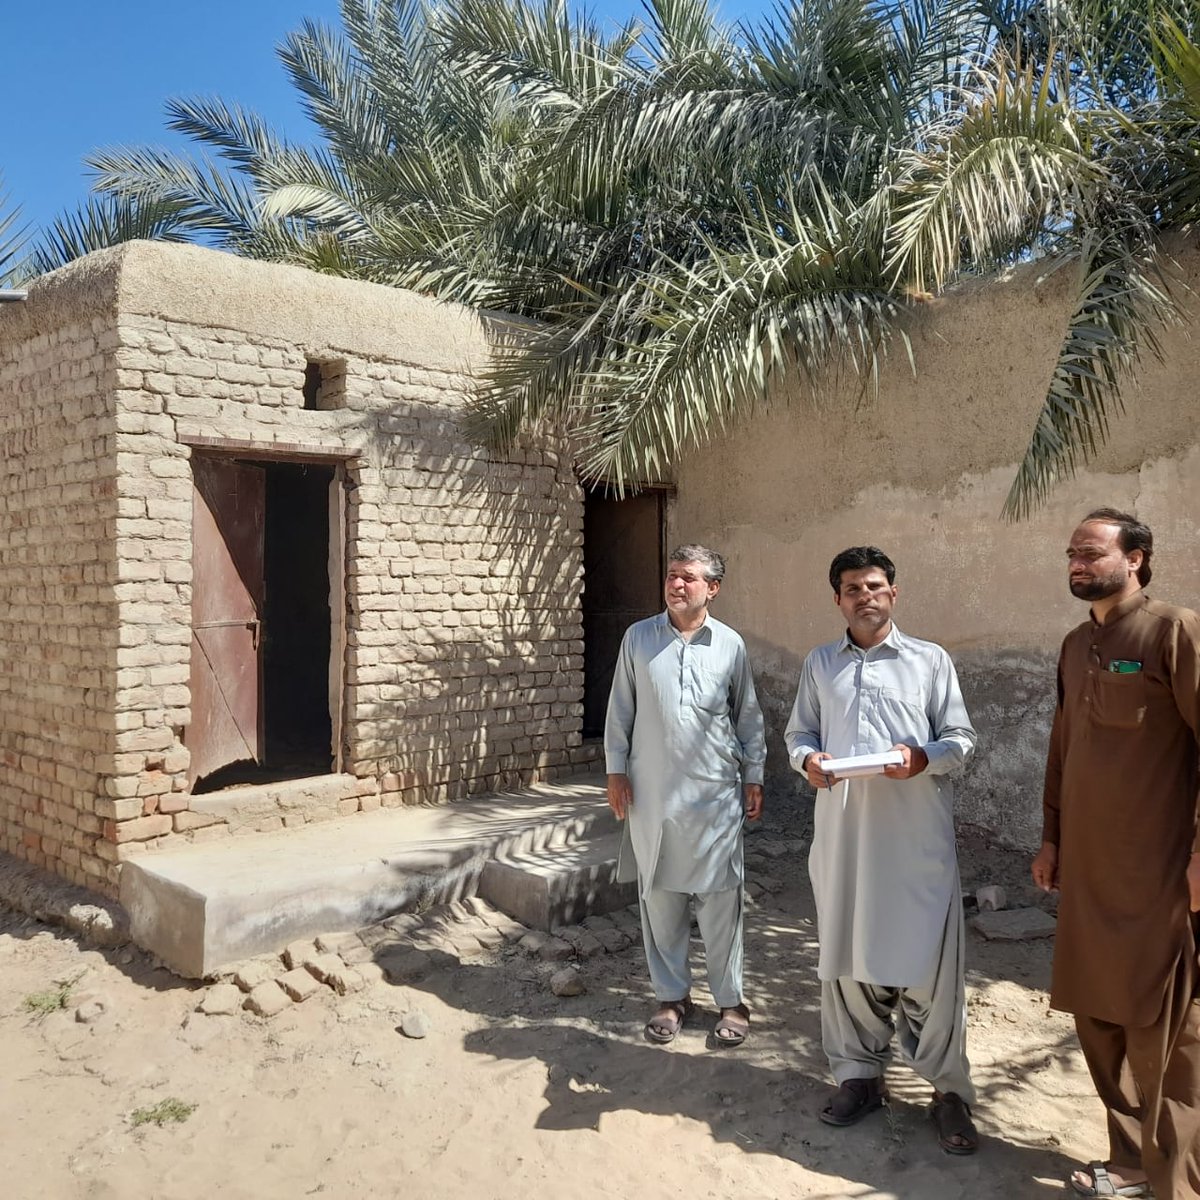 #UNDPinPakistan has started reconstructing govt. service delivery buildings, including schools, damaged by the floods. Learn more about our recovery vision & how @UNDP is supporting people & @GovtofPakistan to #BuildForwardBetter 👉bit.ly/3ThGwpB #ResilientPakistan